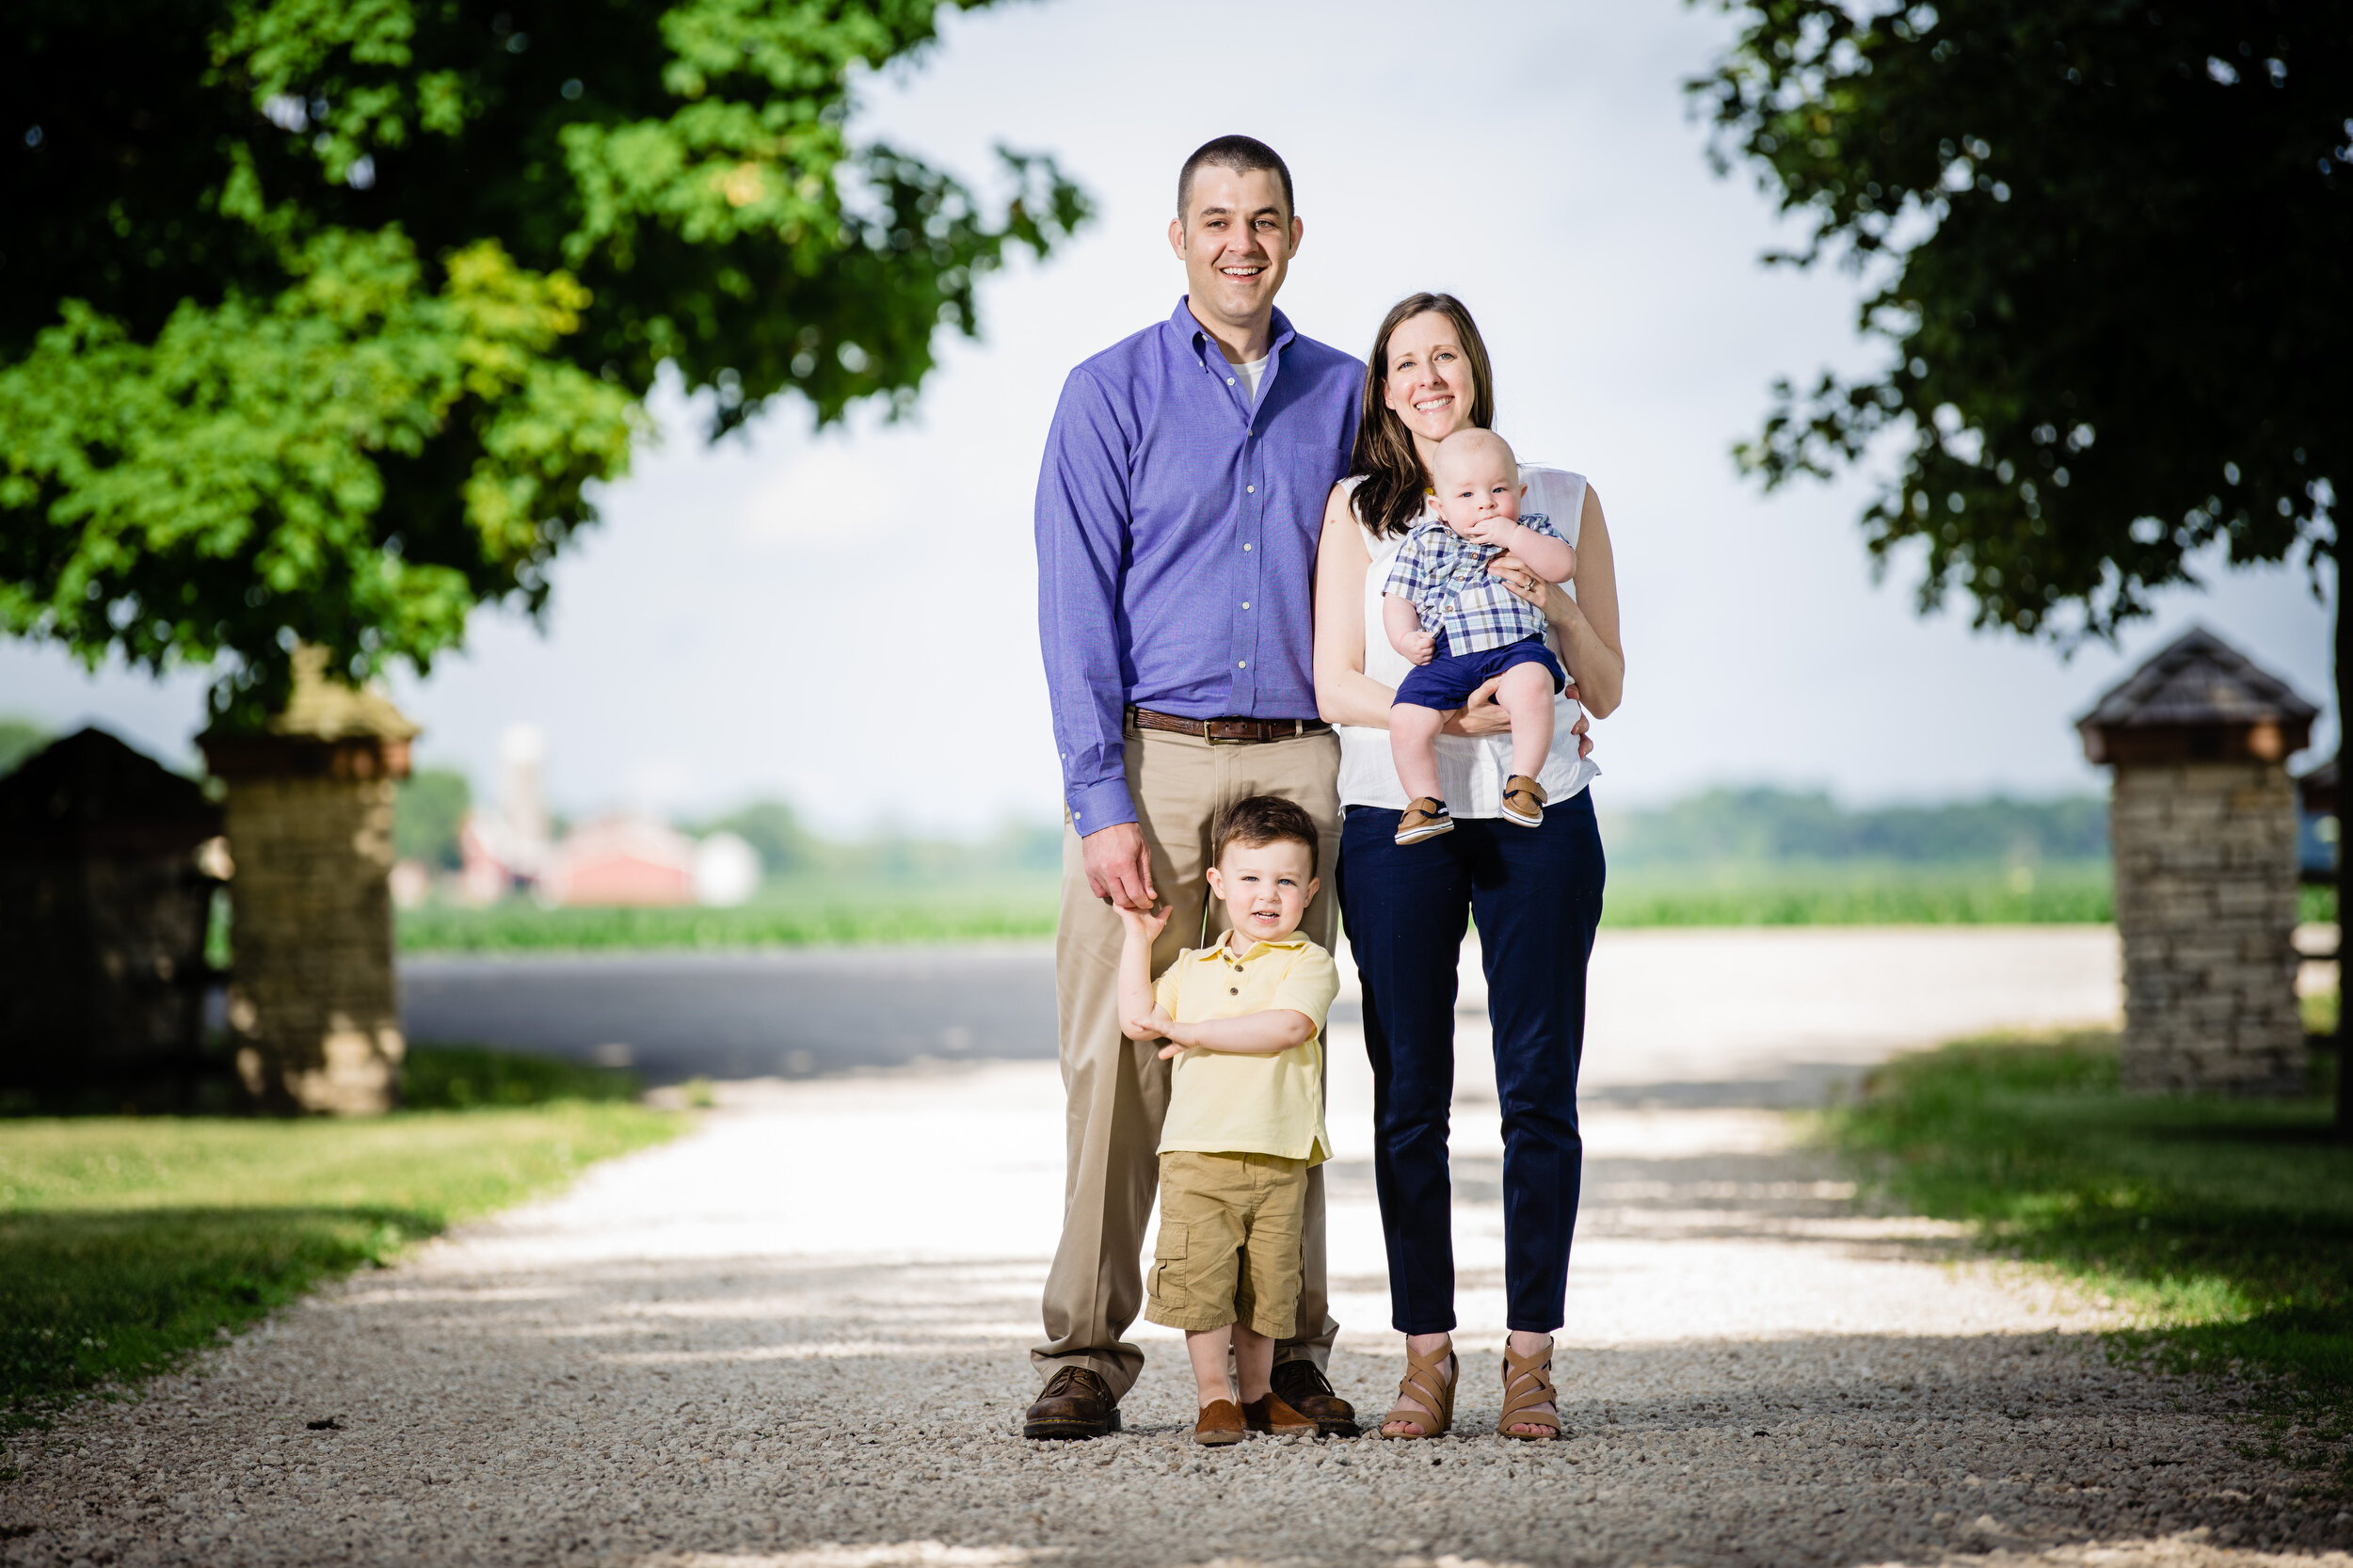 Family photo session in Sandwich, IL: family portrait session photographed by J. Brown Photography.